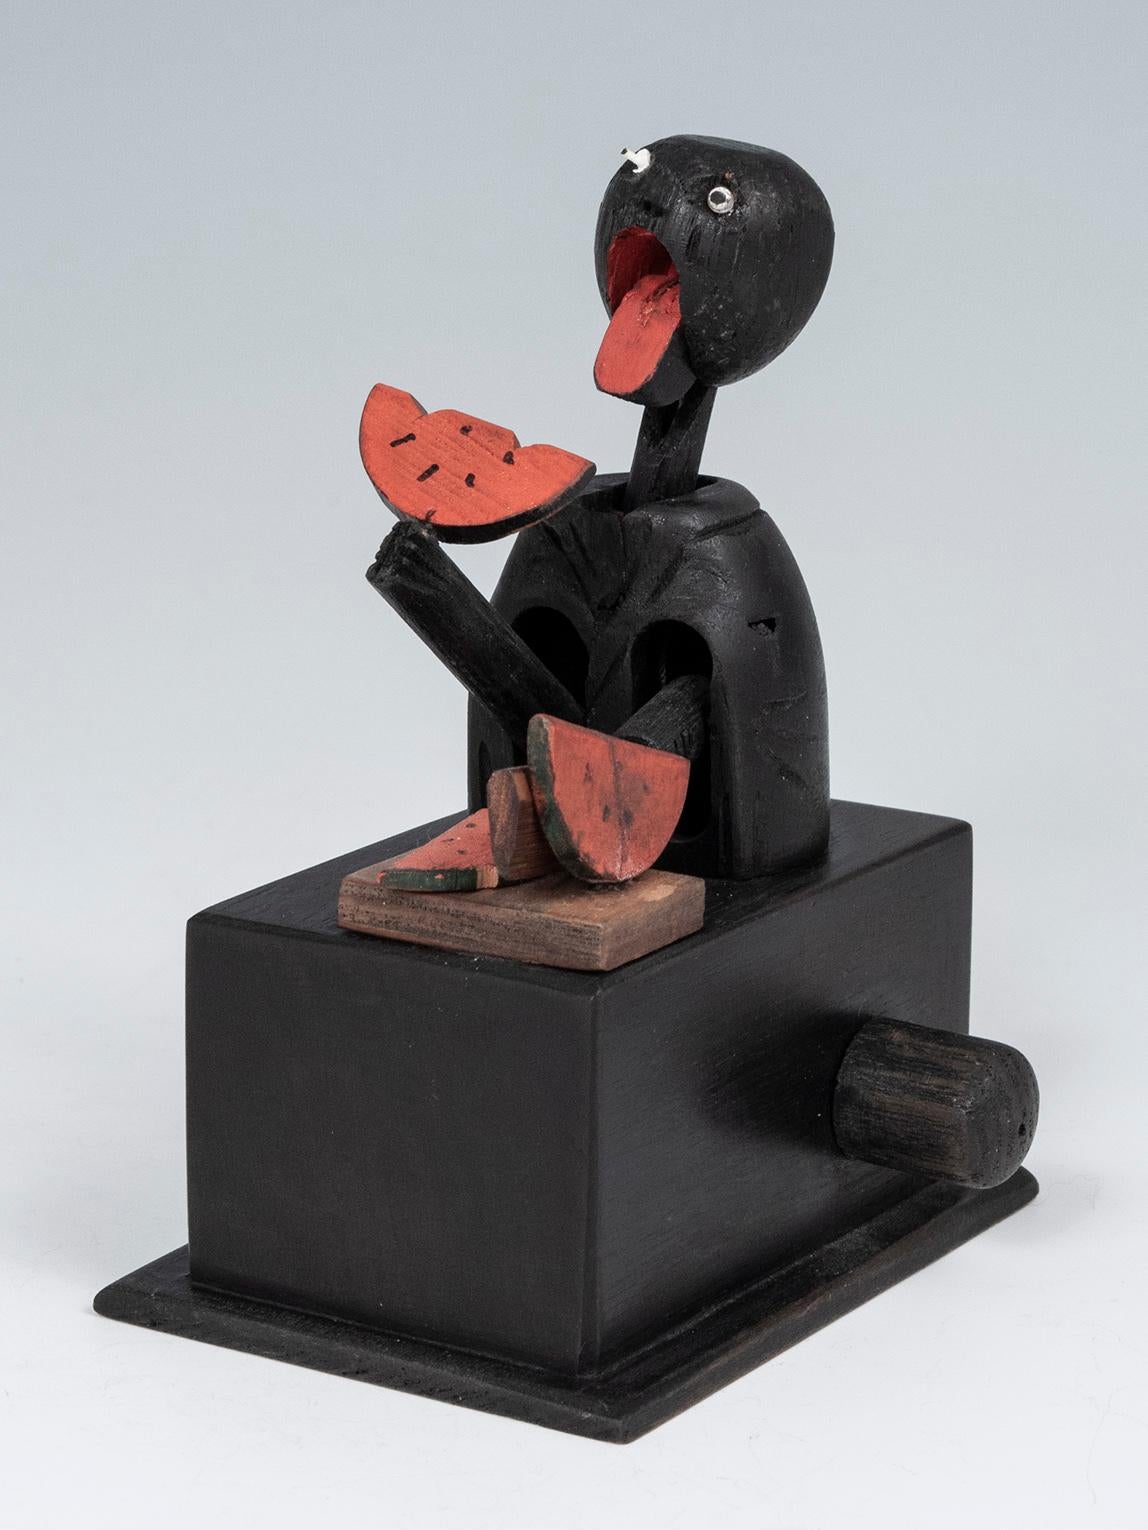 Early 20th century mechanical toy from Kobe, Japan.

This small mechanical toy was made in Kobe, Japan. This is the classic doll of a man chopping and eating a slice of watermelon, with the action controlled by a turning knob on the left side,